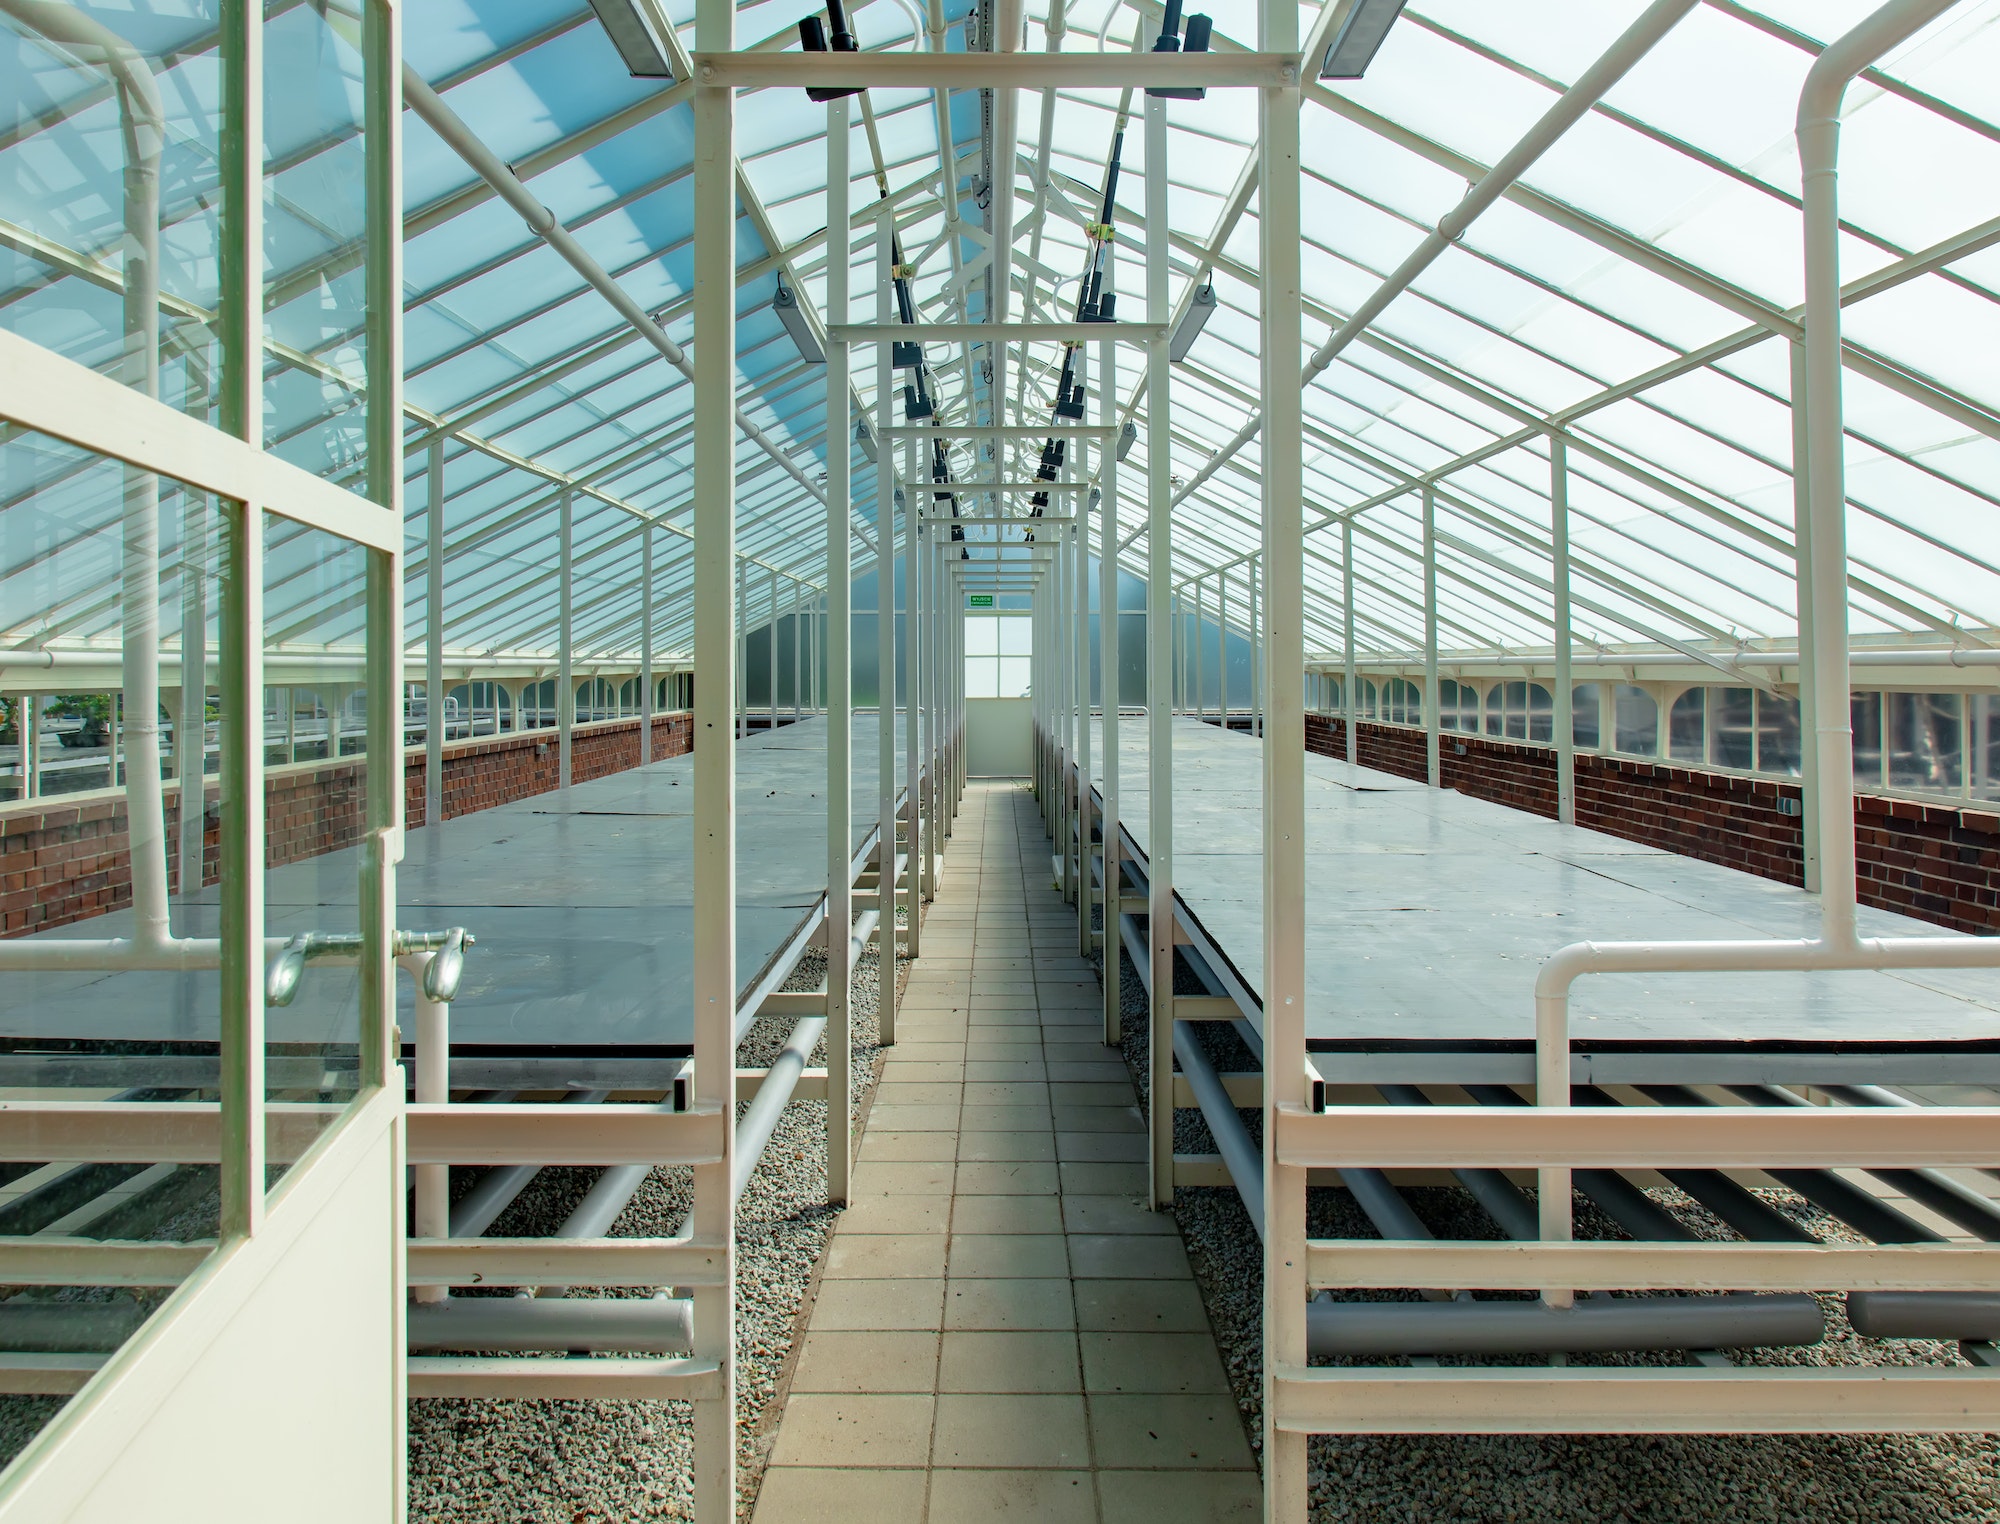 View on empty tables in a greenhouse